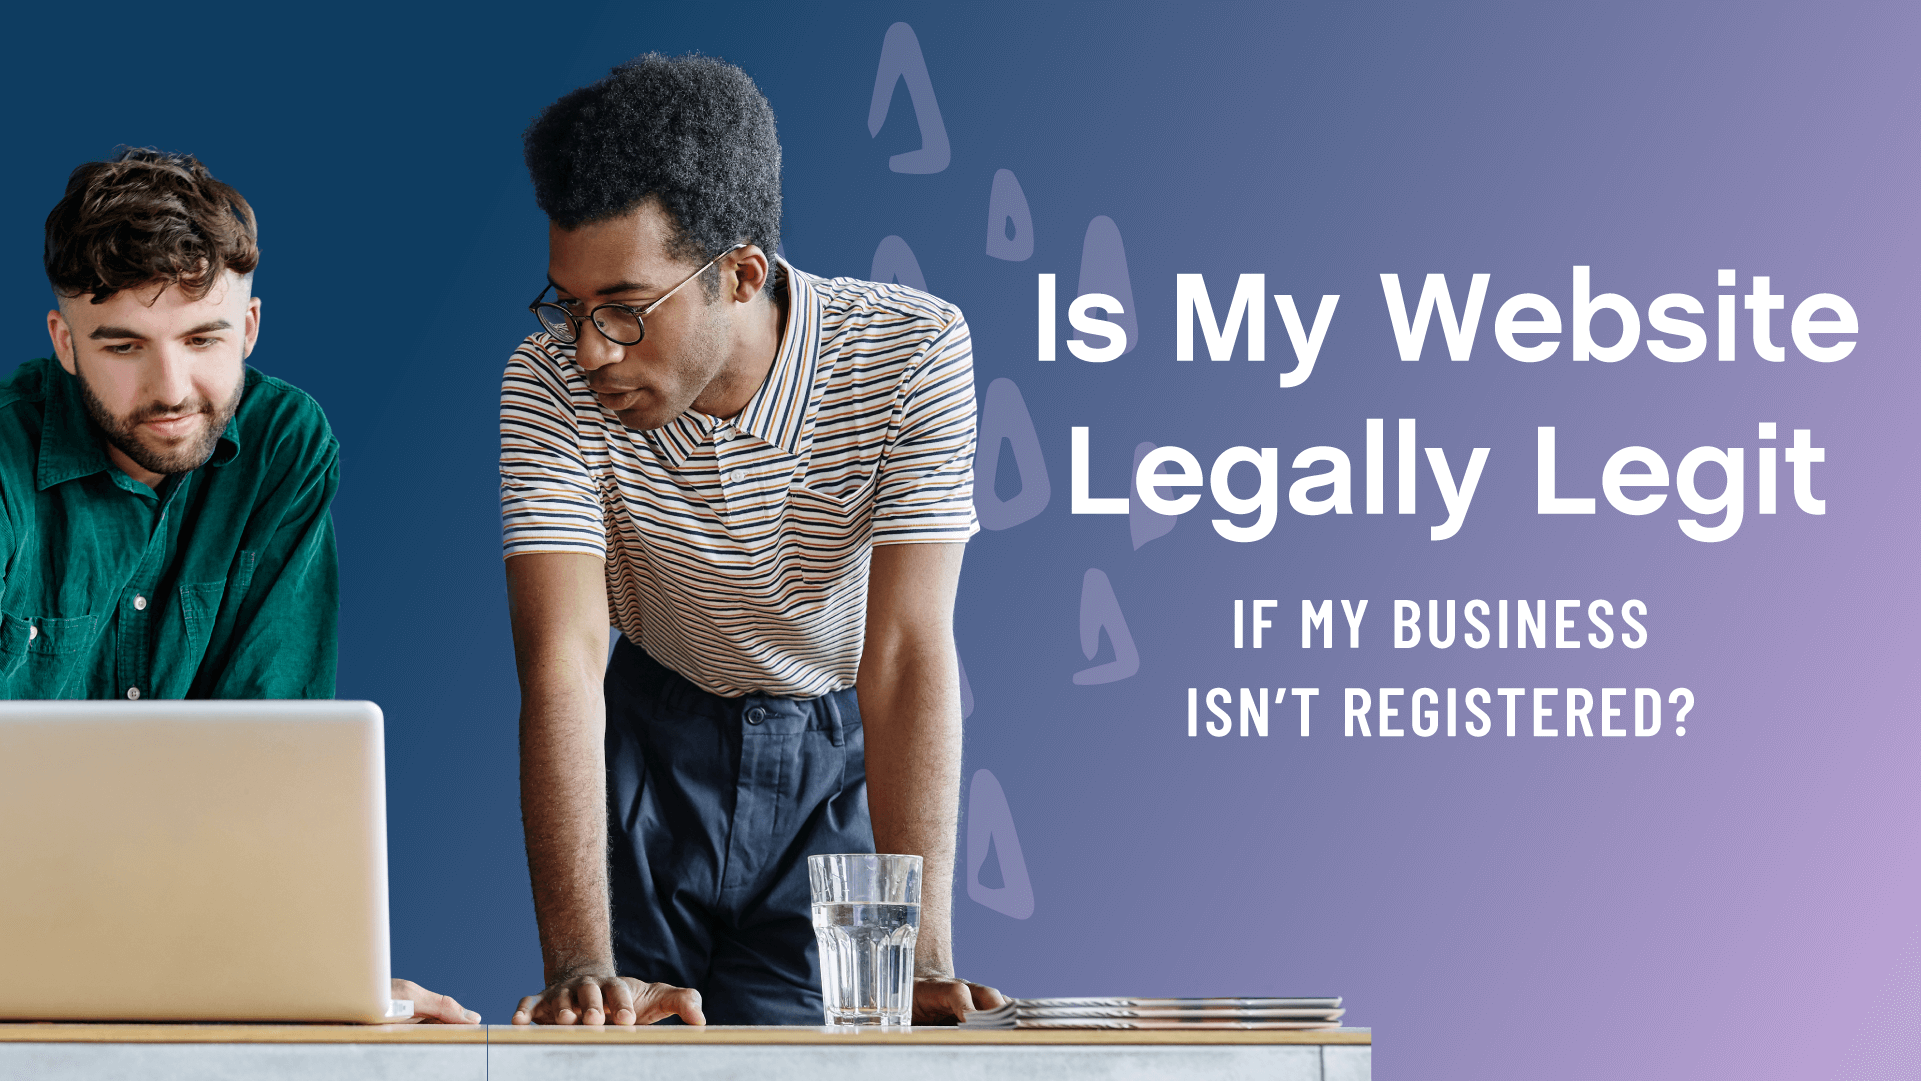 Is My Website Legally Legit if My Business Isn’t Registered?